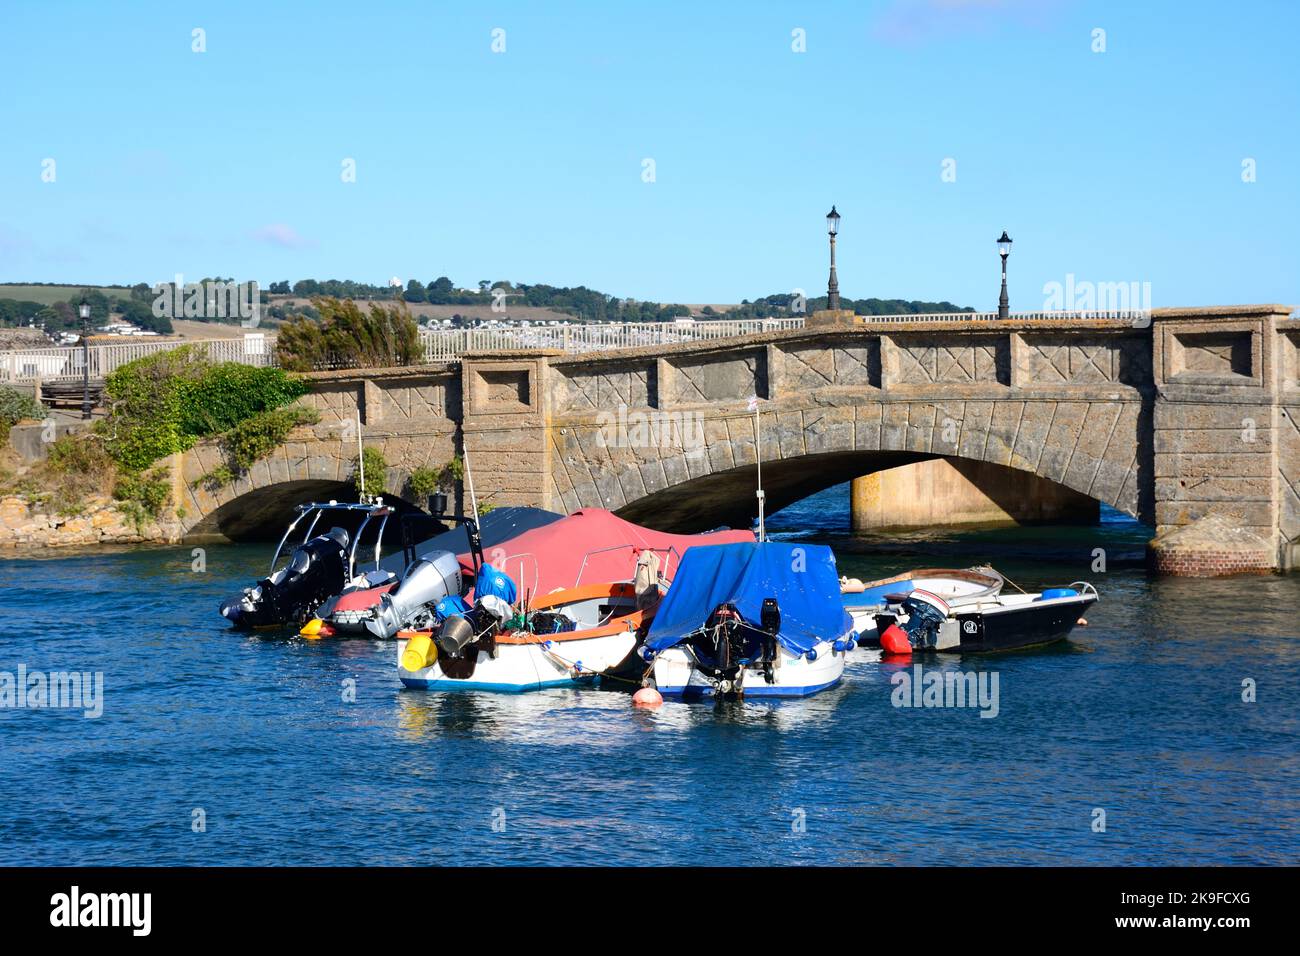 Bridge across the River Axe with small boats in the foreground, Axmouth, Devon, UK, Europe. Stock Photo